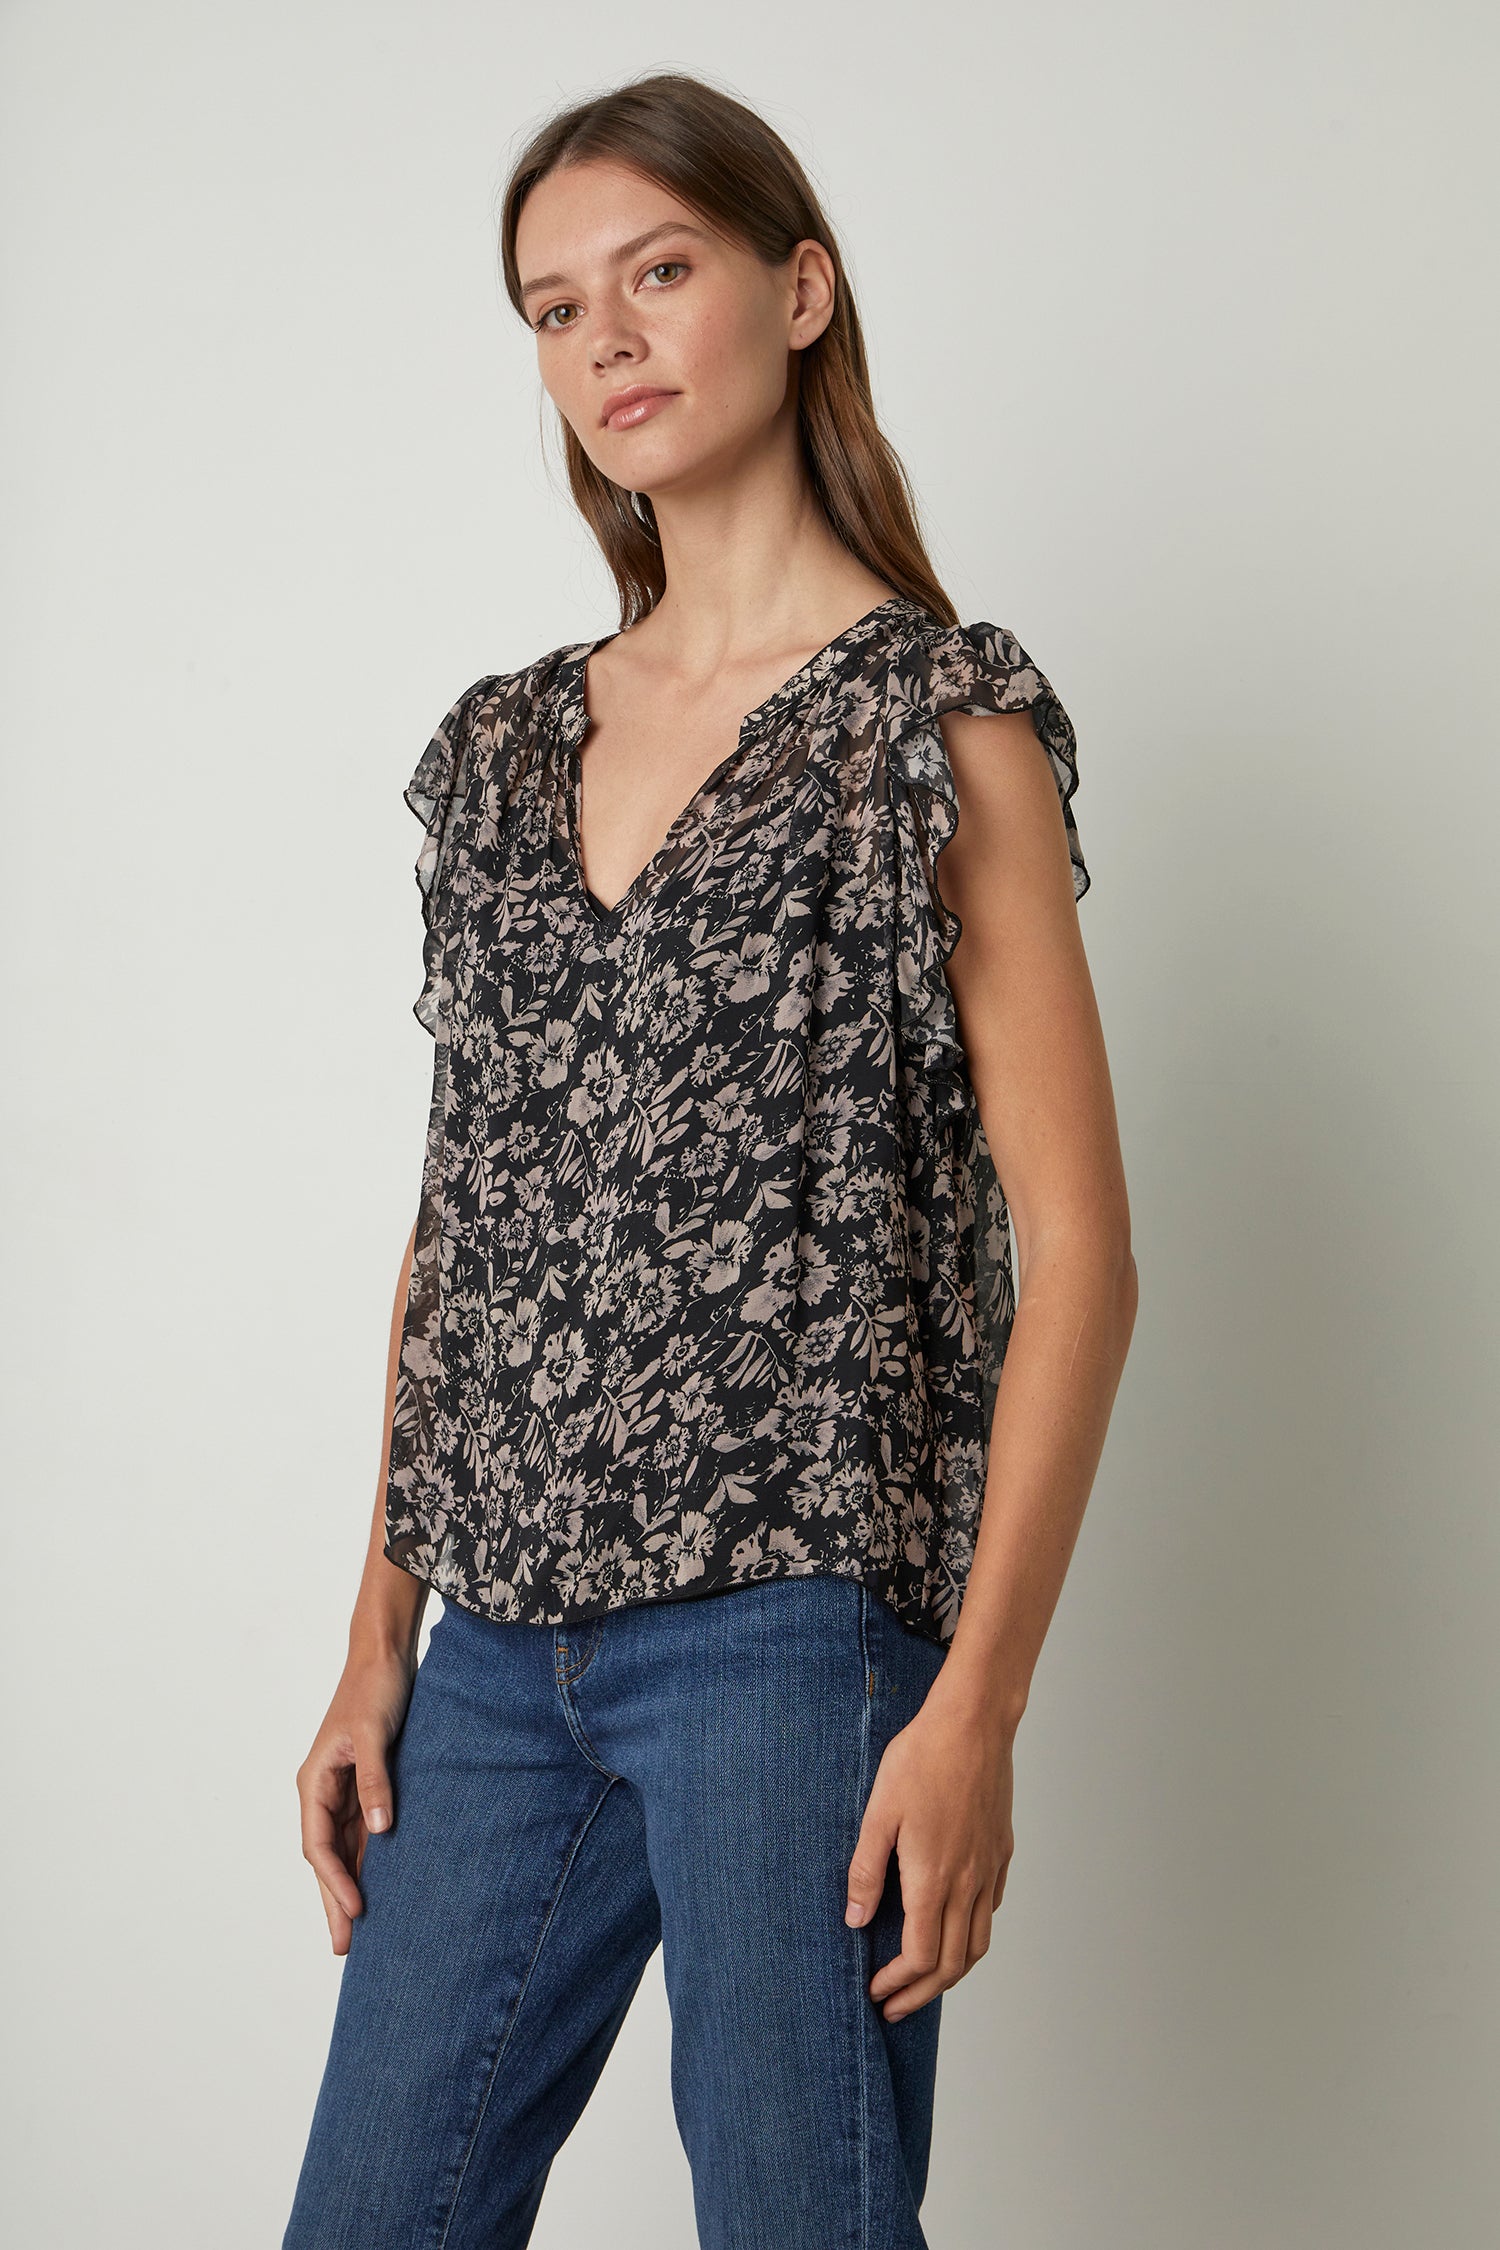 Black and blush floral print top with a flutter sleeve